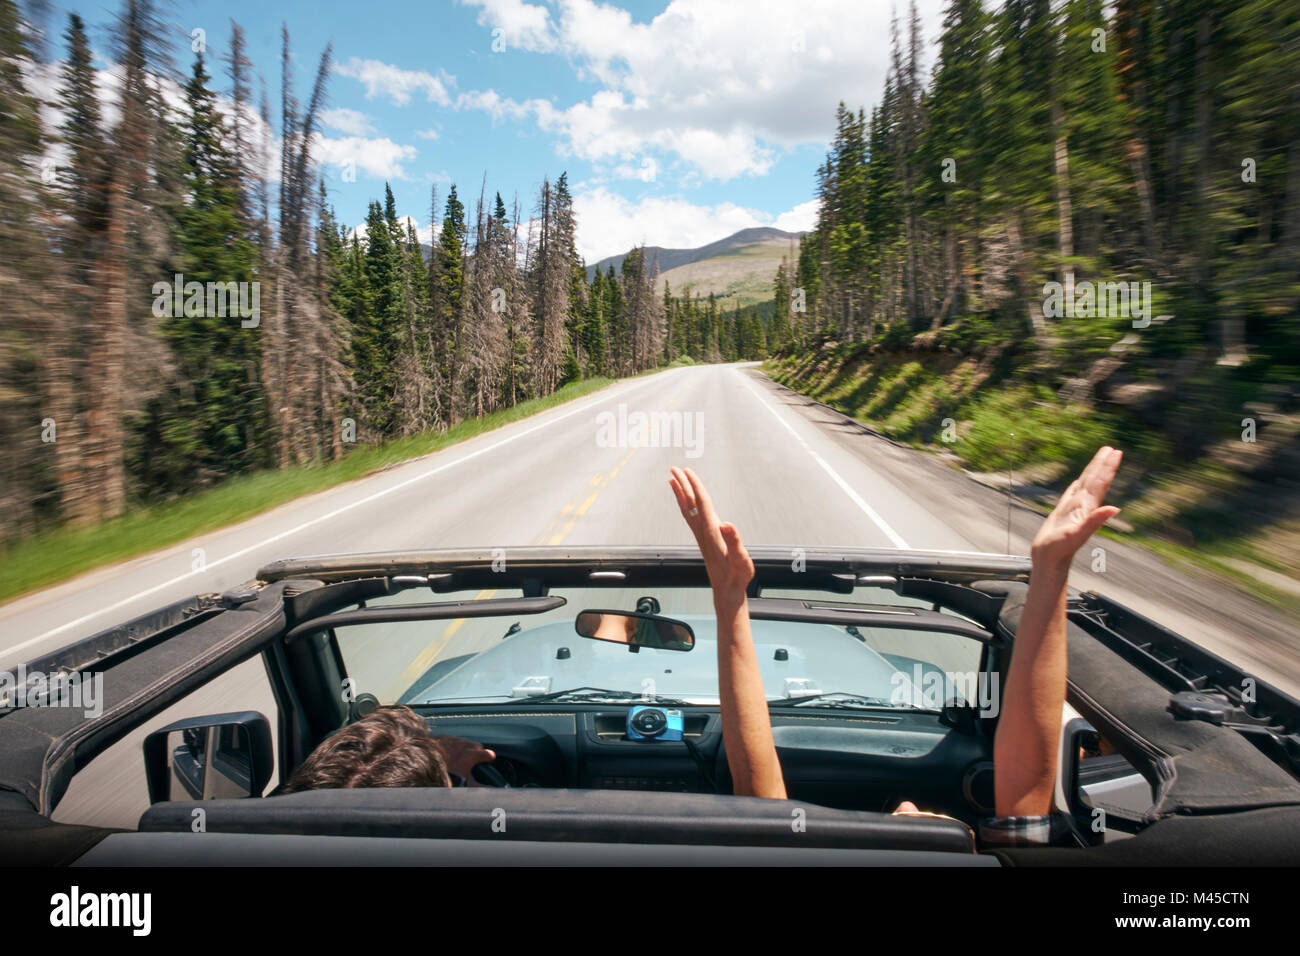 Road trip couple driving convertible on rural highway with hands raised, Breckenridge, Colorado, USA Stock Photo